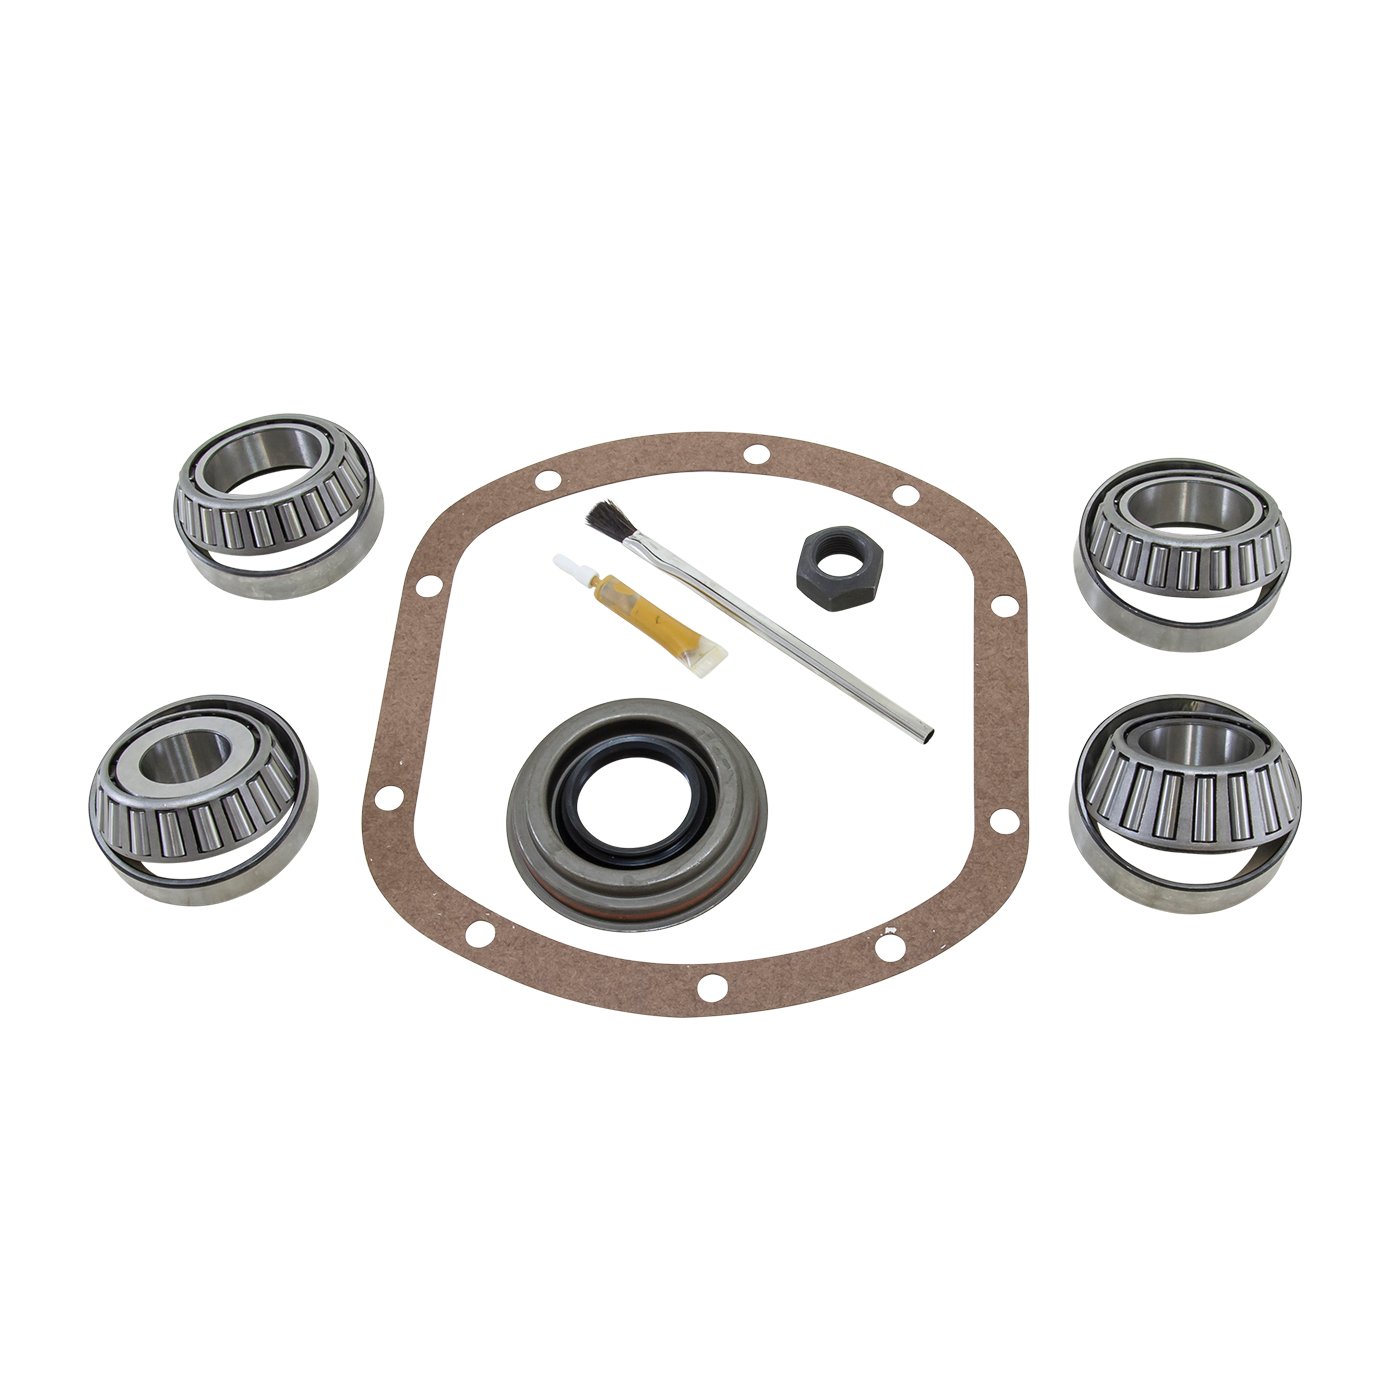 Bearing Install Kit For Dana 30 Front Differential,